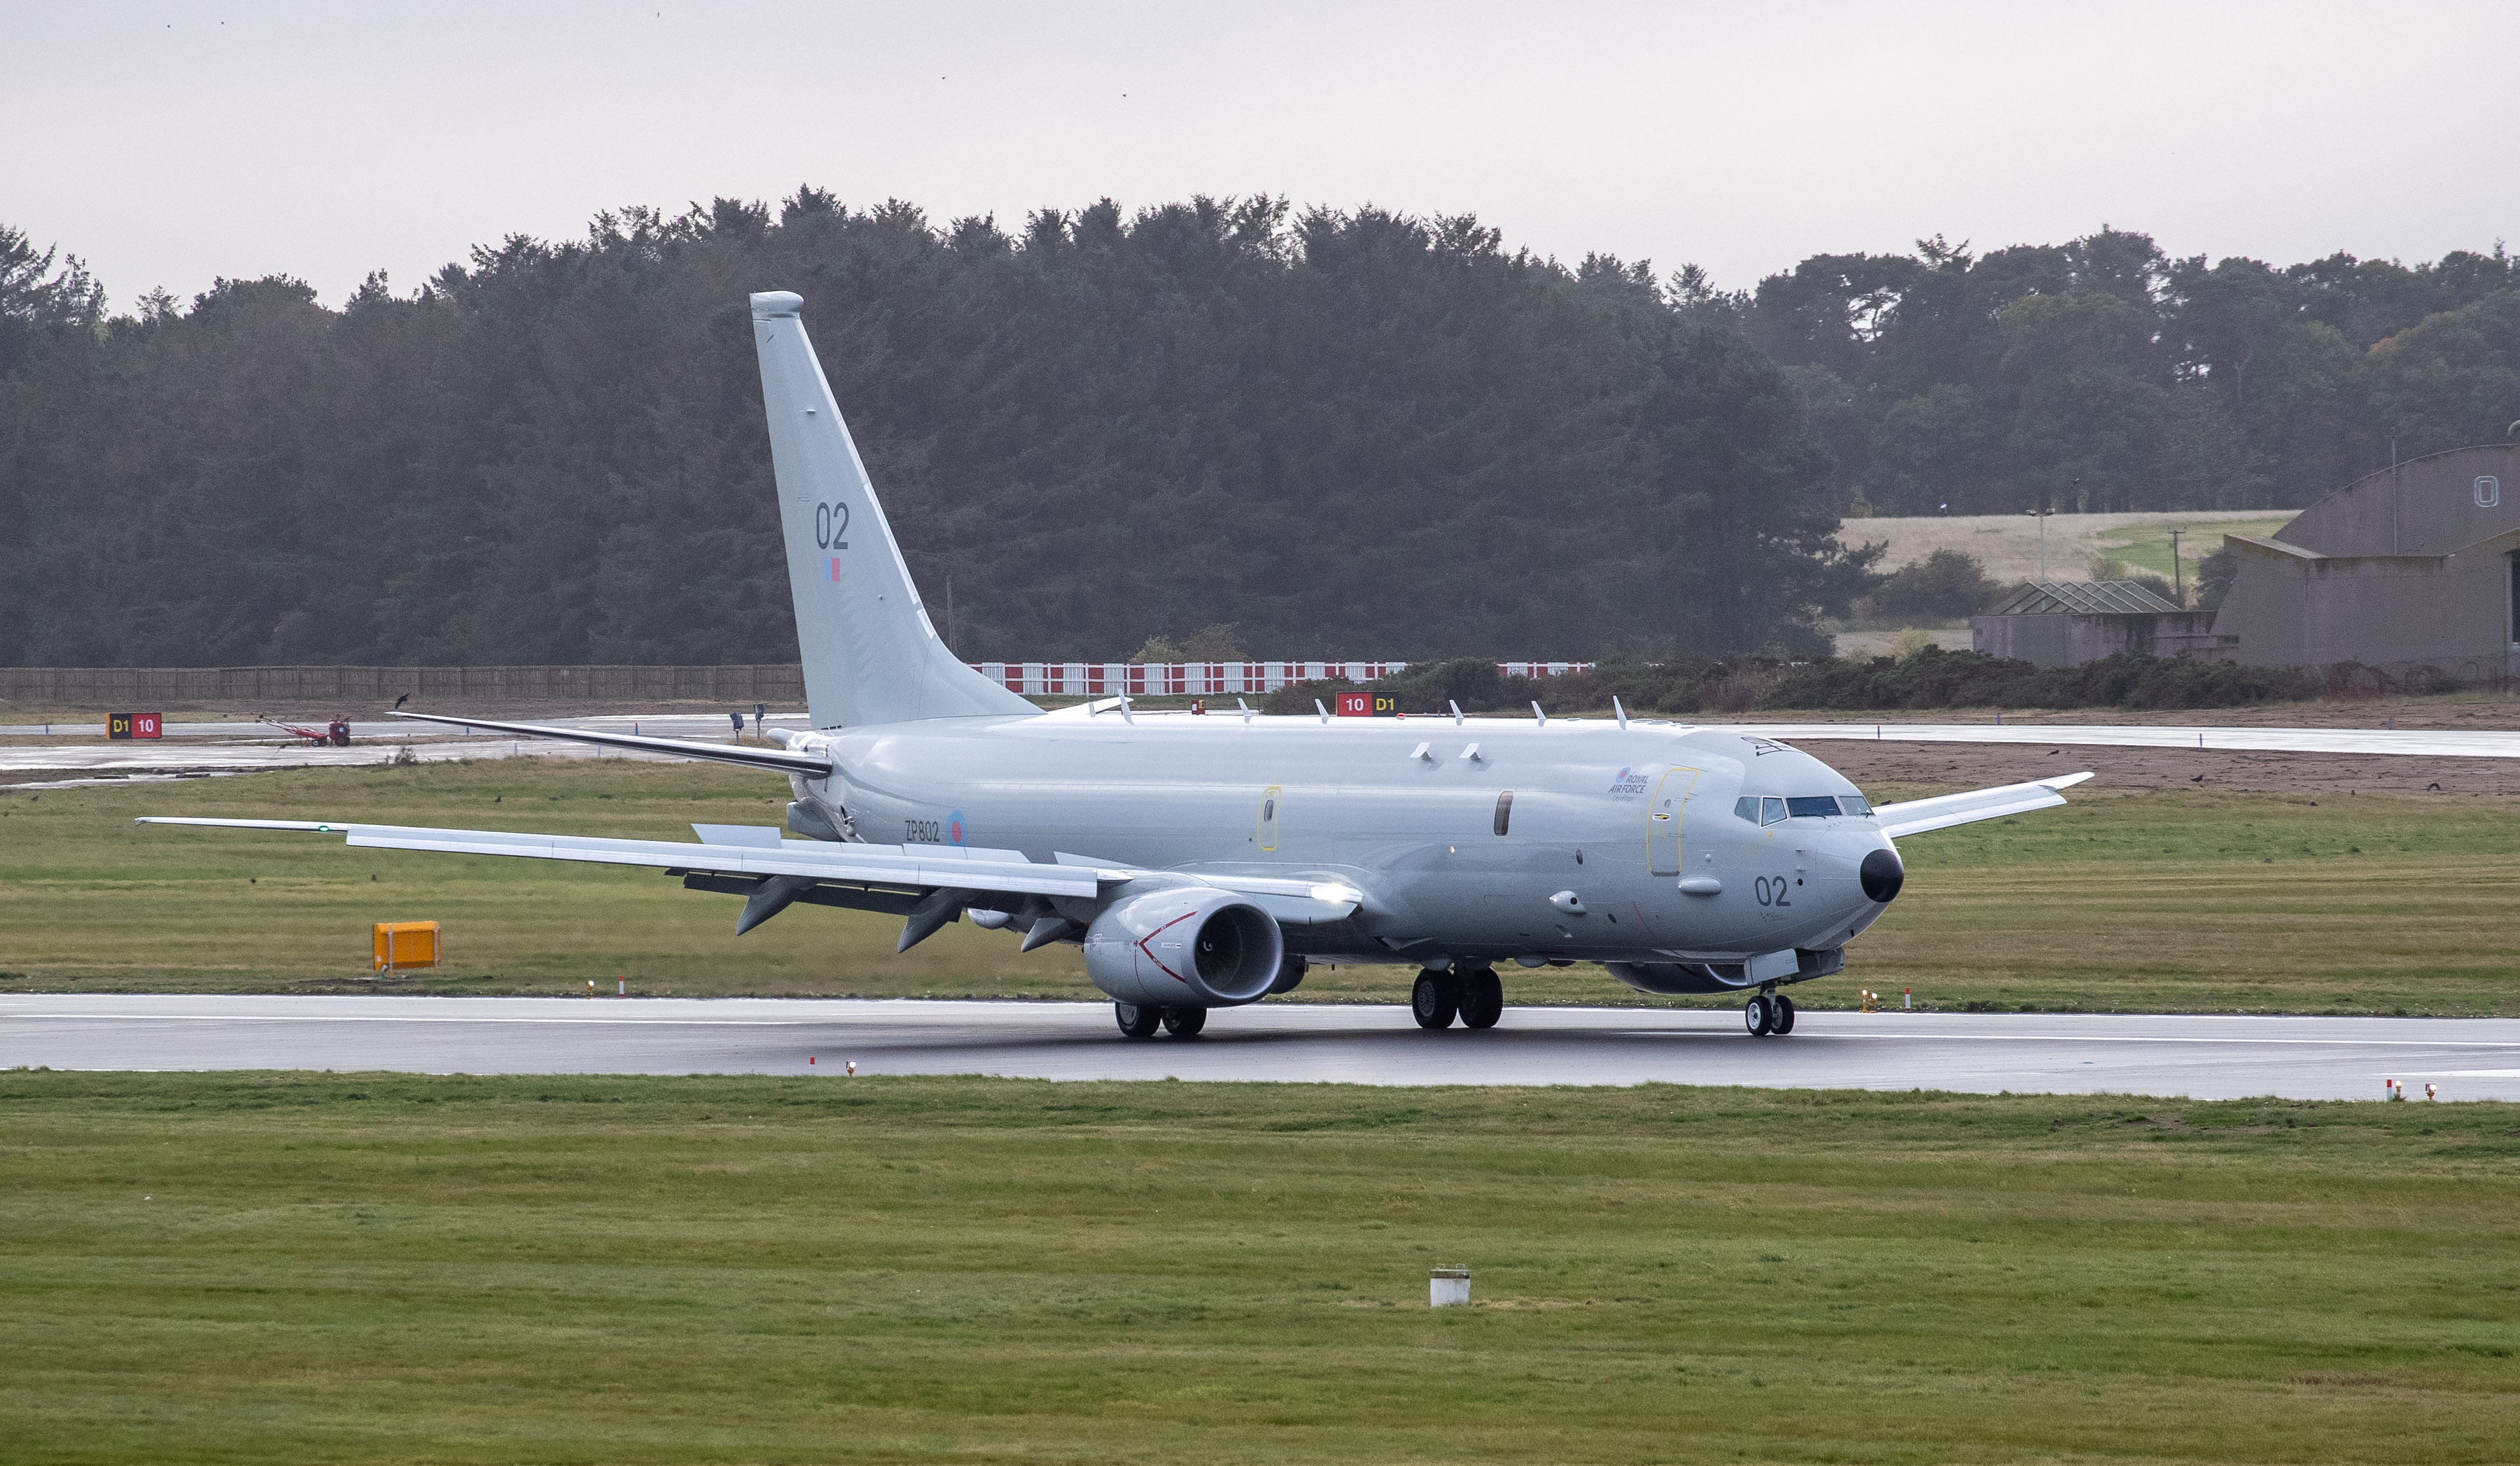 Image shows a RAF Poseidon aircraft on the airfield.